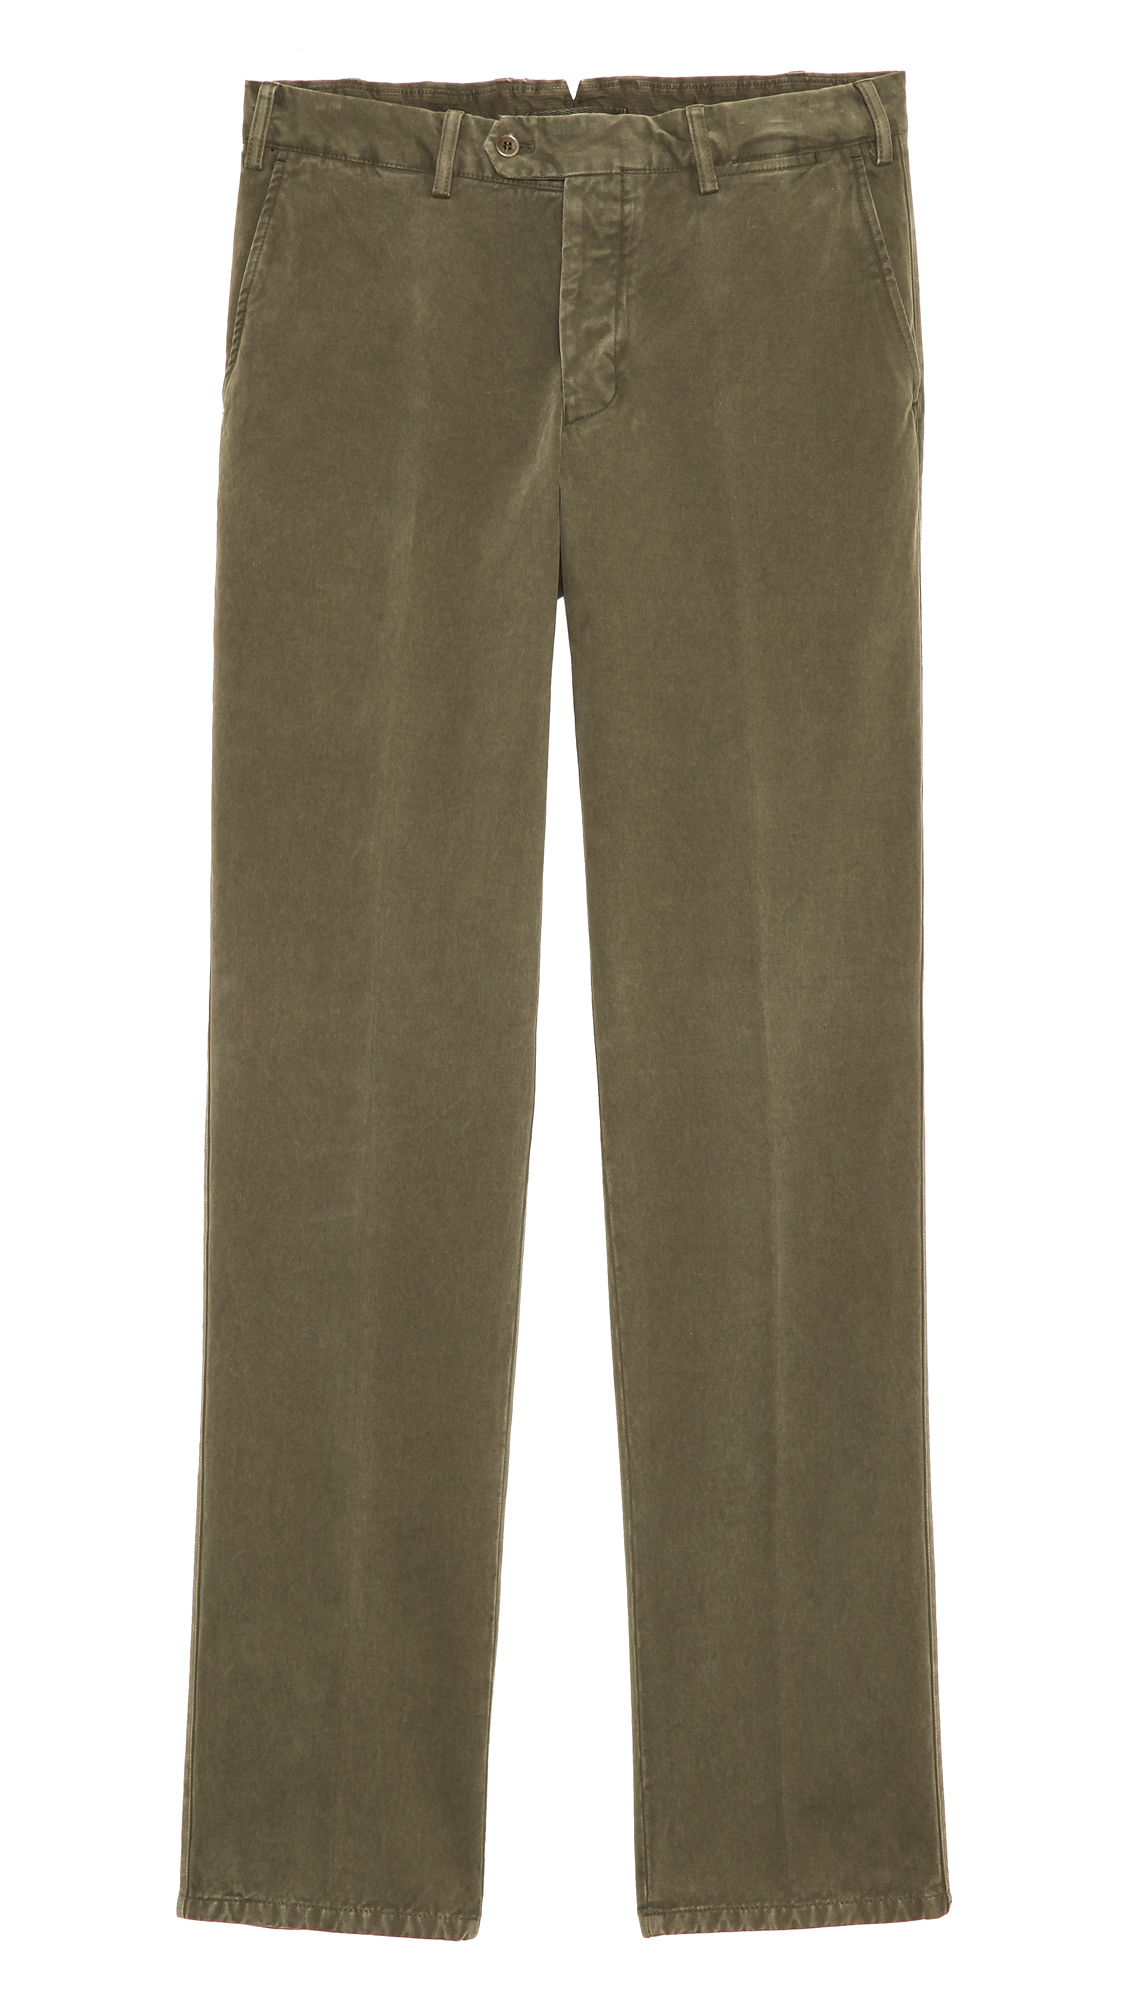 Lyst - Aspesi Brushed Twill Chinos in Green for Men